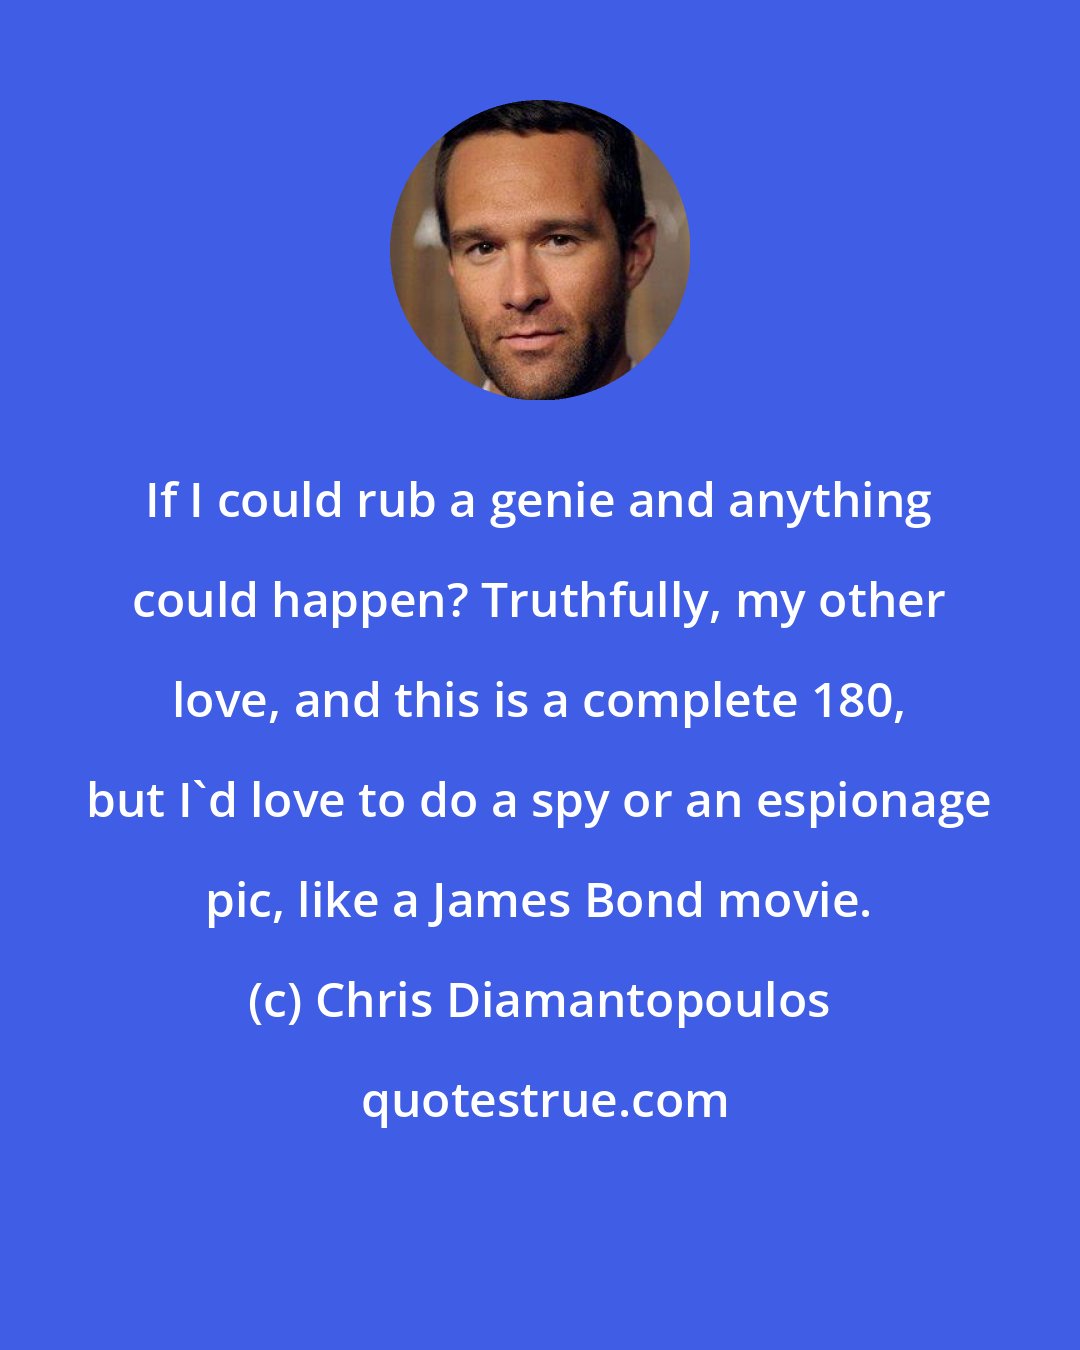 Chris Diamantopoulos: If I could rub a genie and anything could happen? Truthfully, my other love, and this is a complete 180, but I'd love to do a spy or an espionage pic, like a James Bond movie.